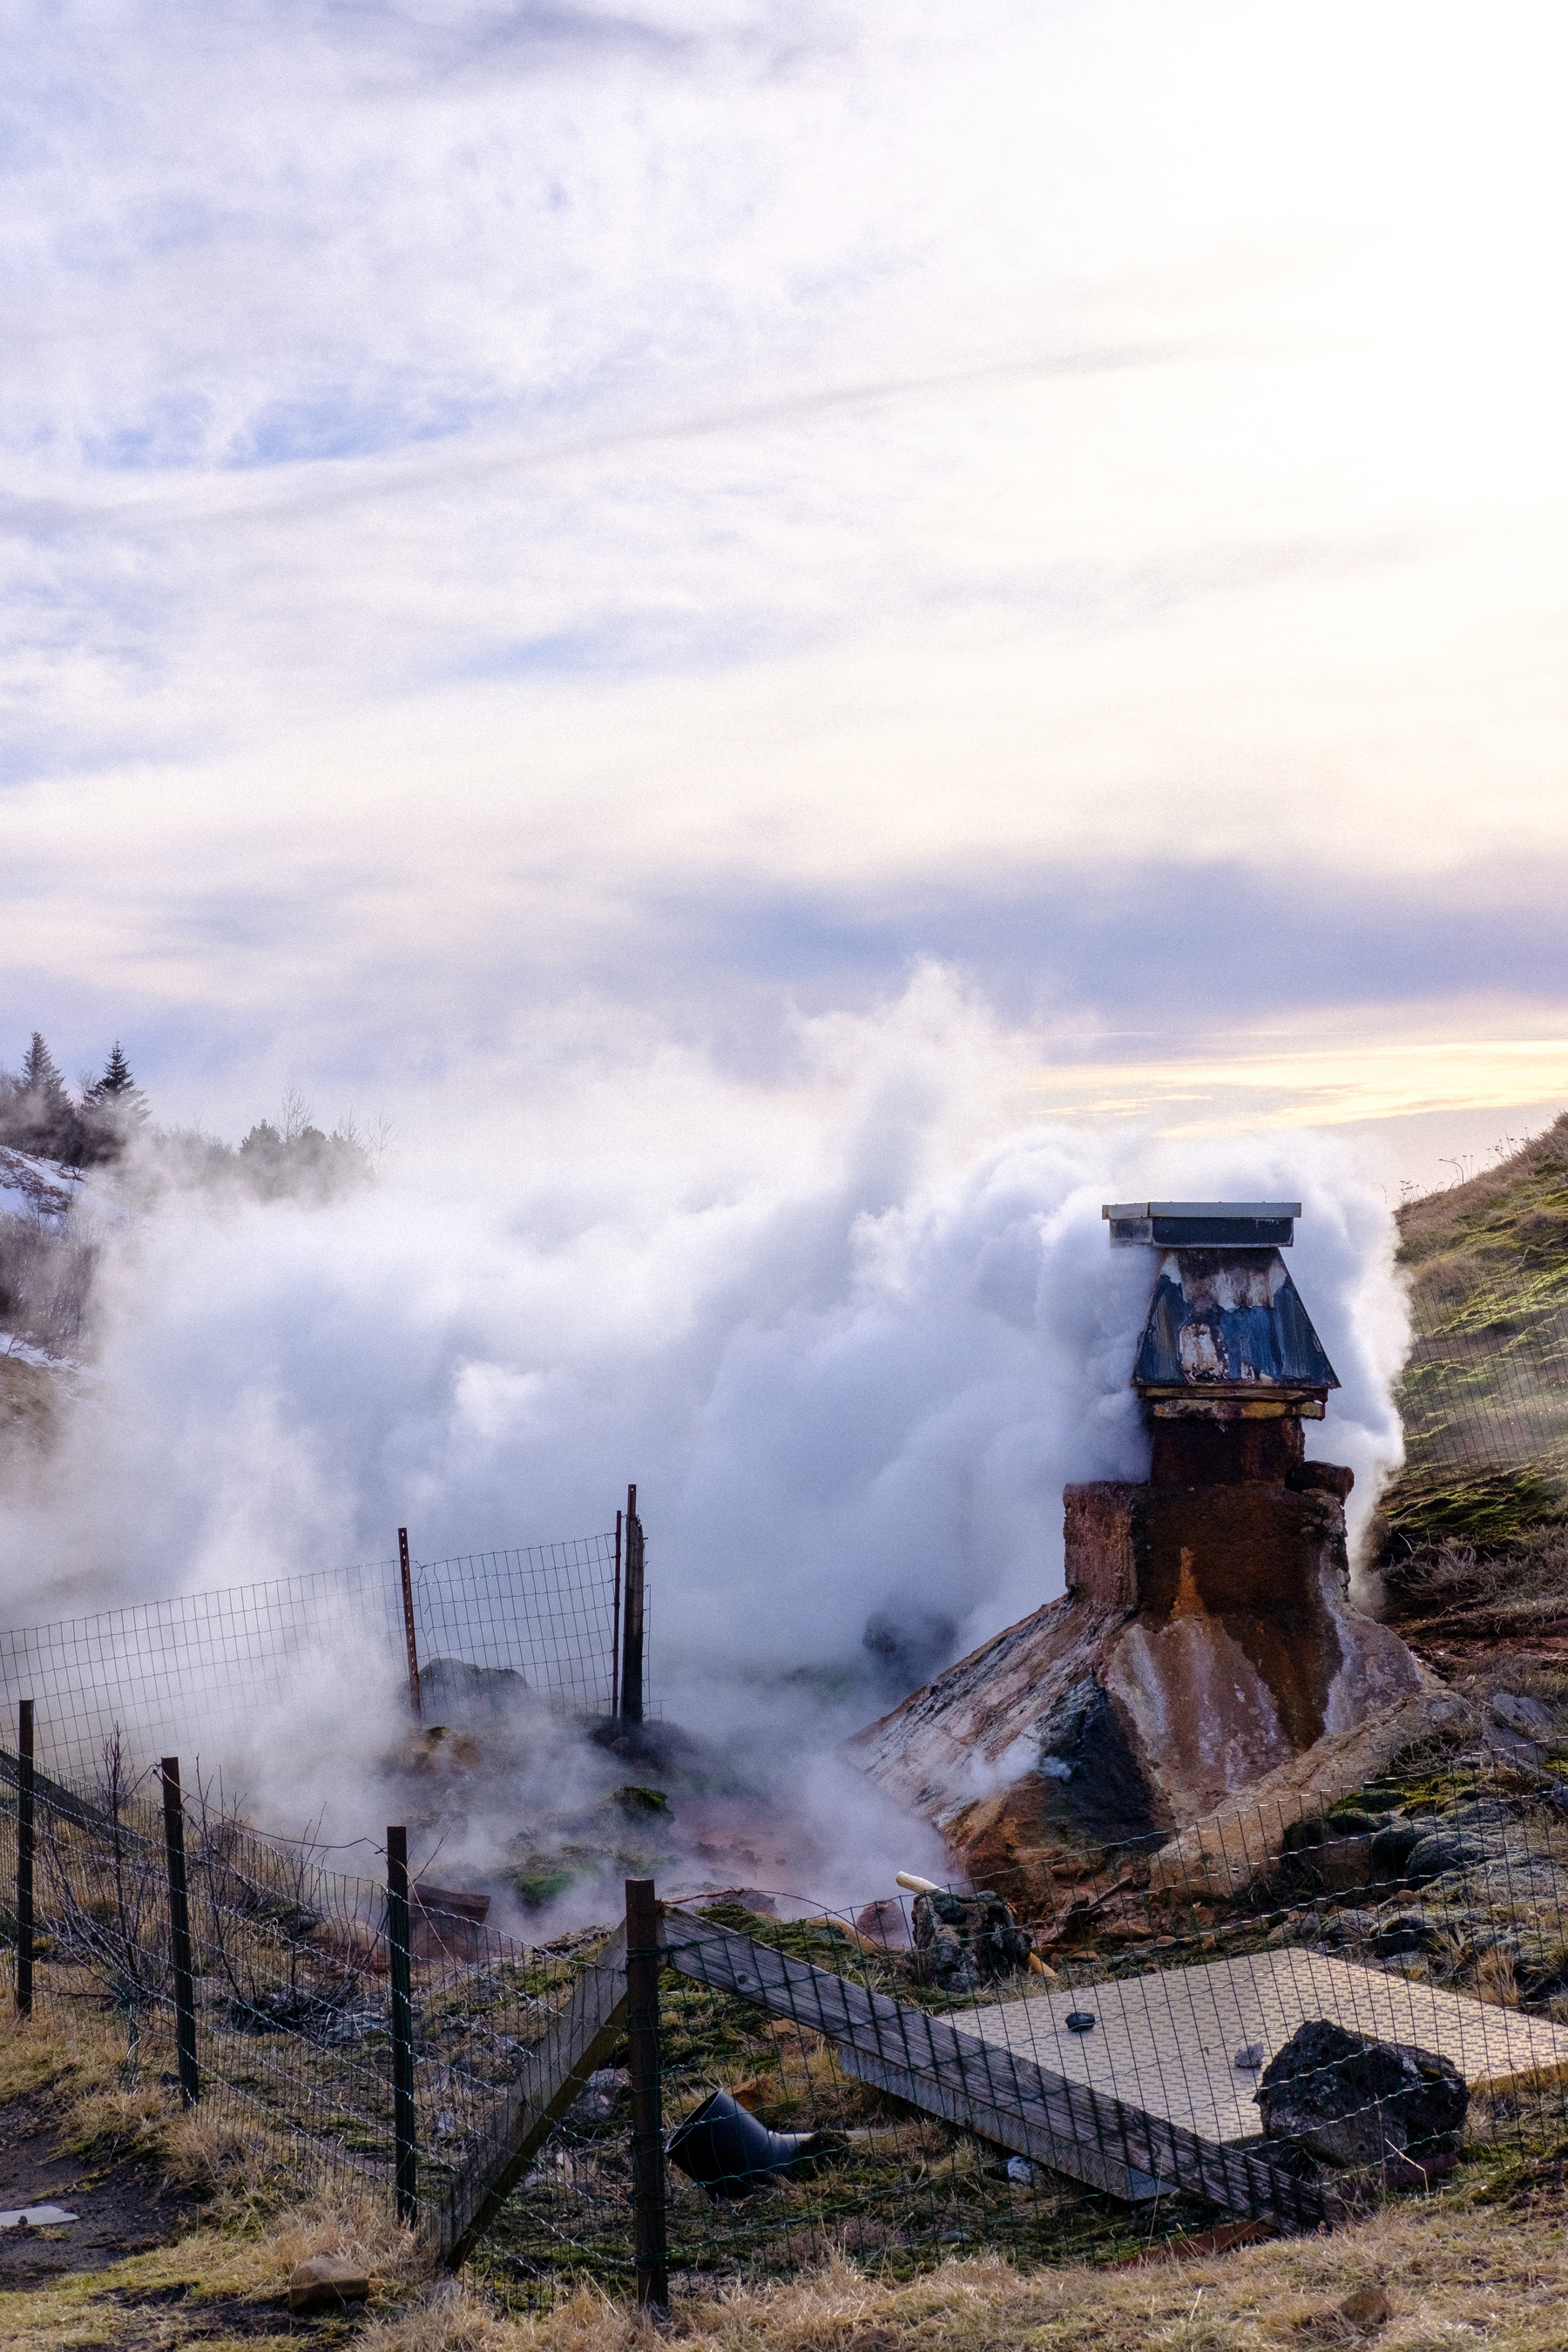 Steam rises from a geothermal well near one of the hotels